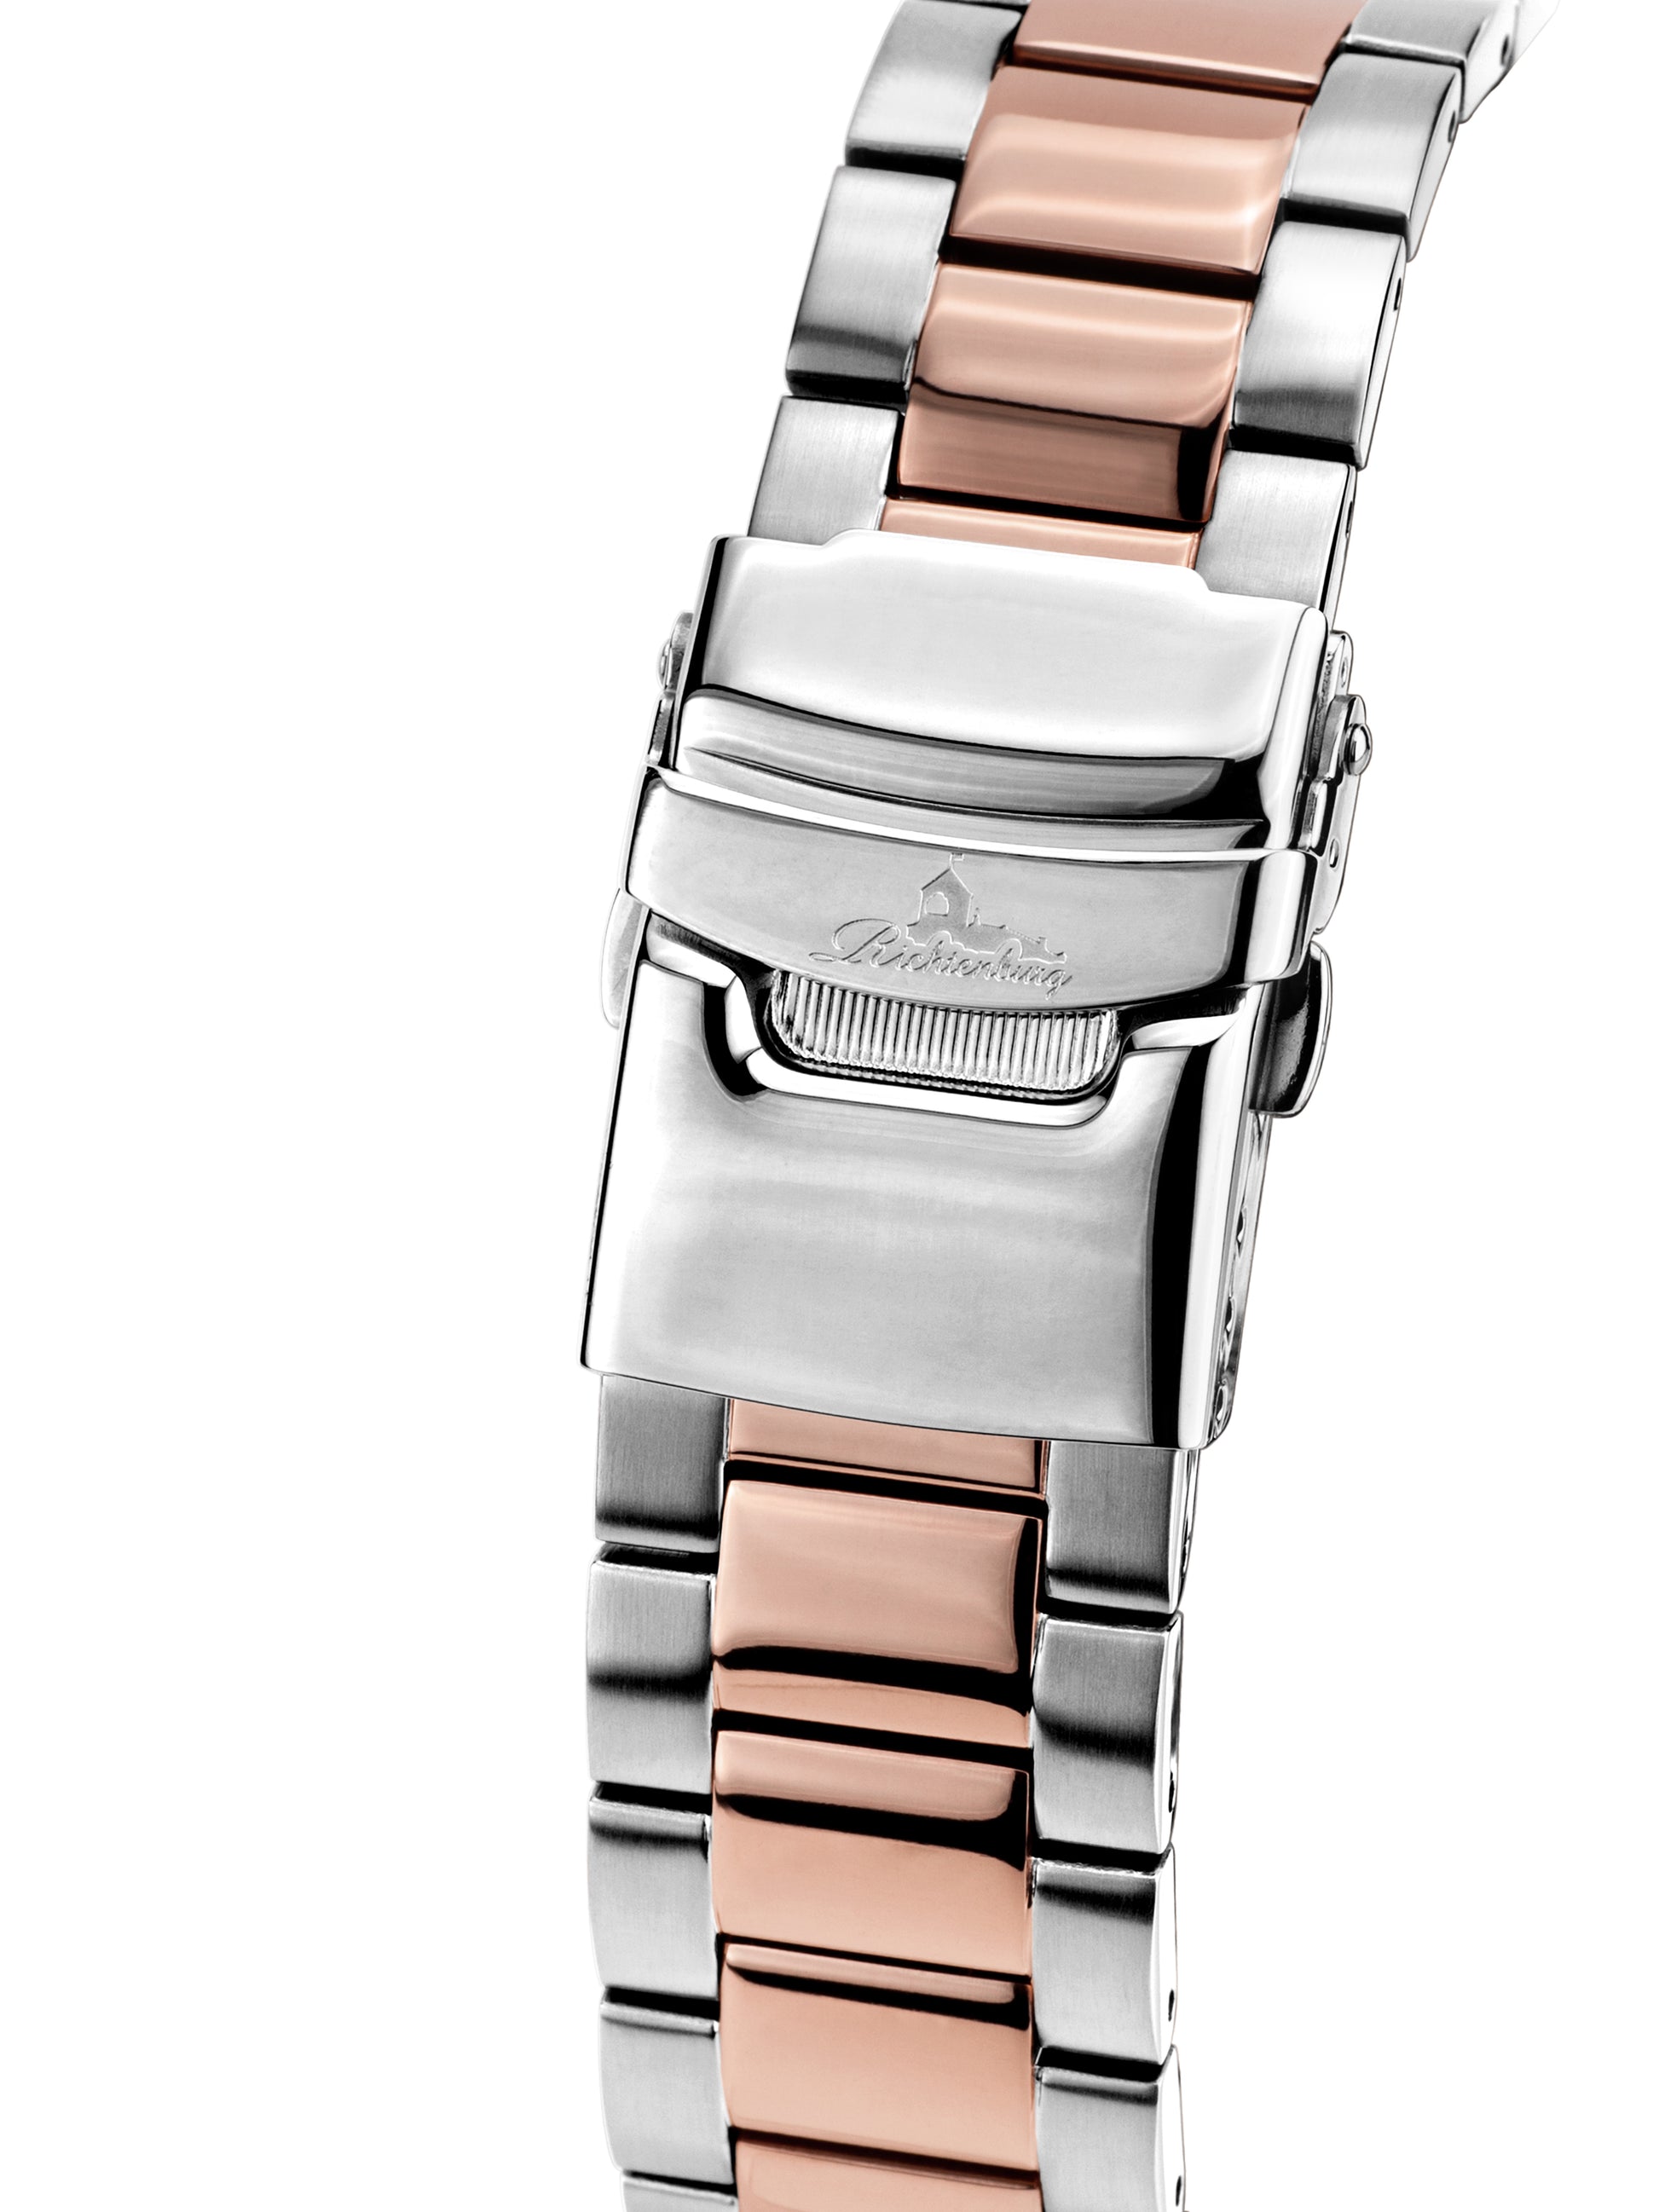 Automatic watches — Fastpace — Richtenburg — steel silver rosegold two-tone